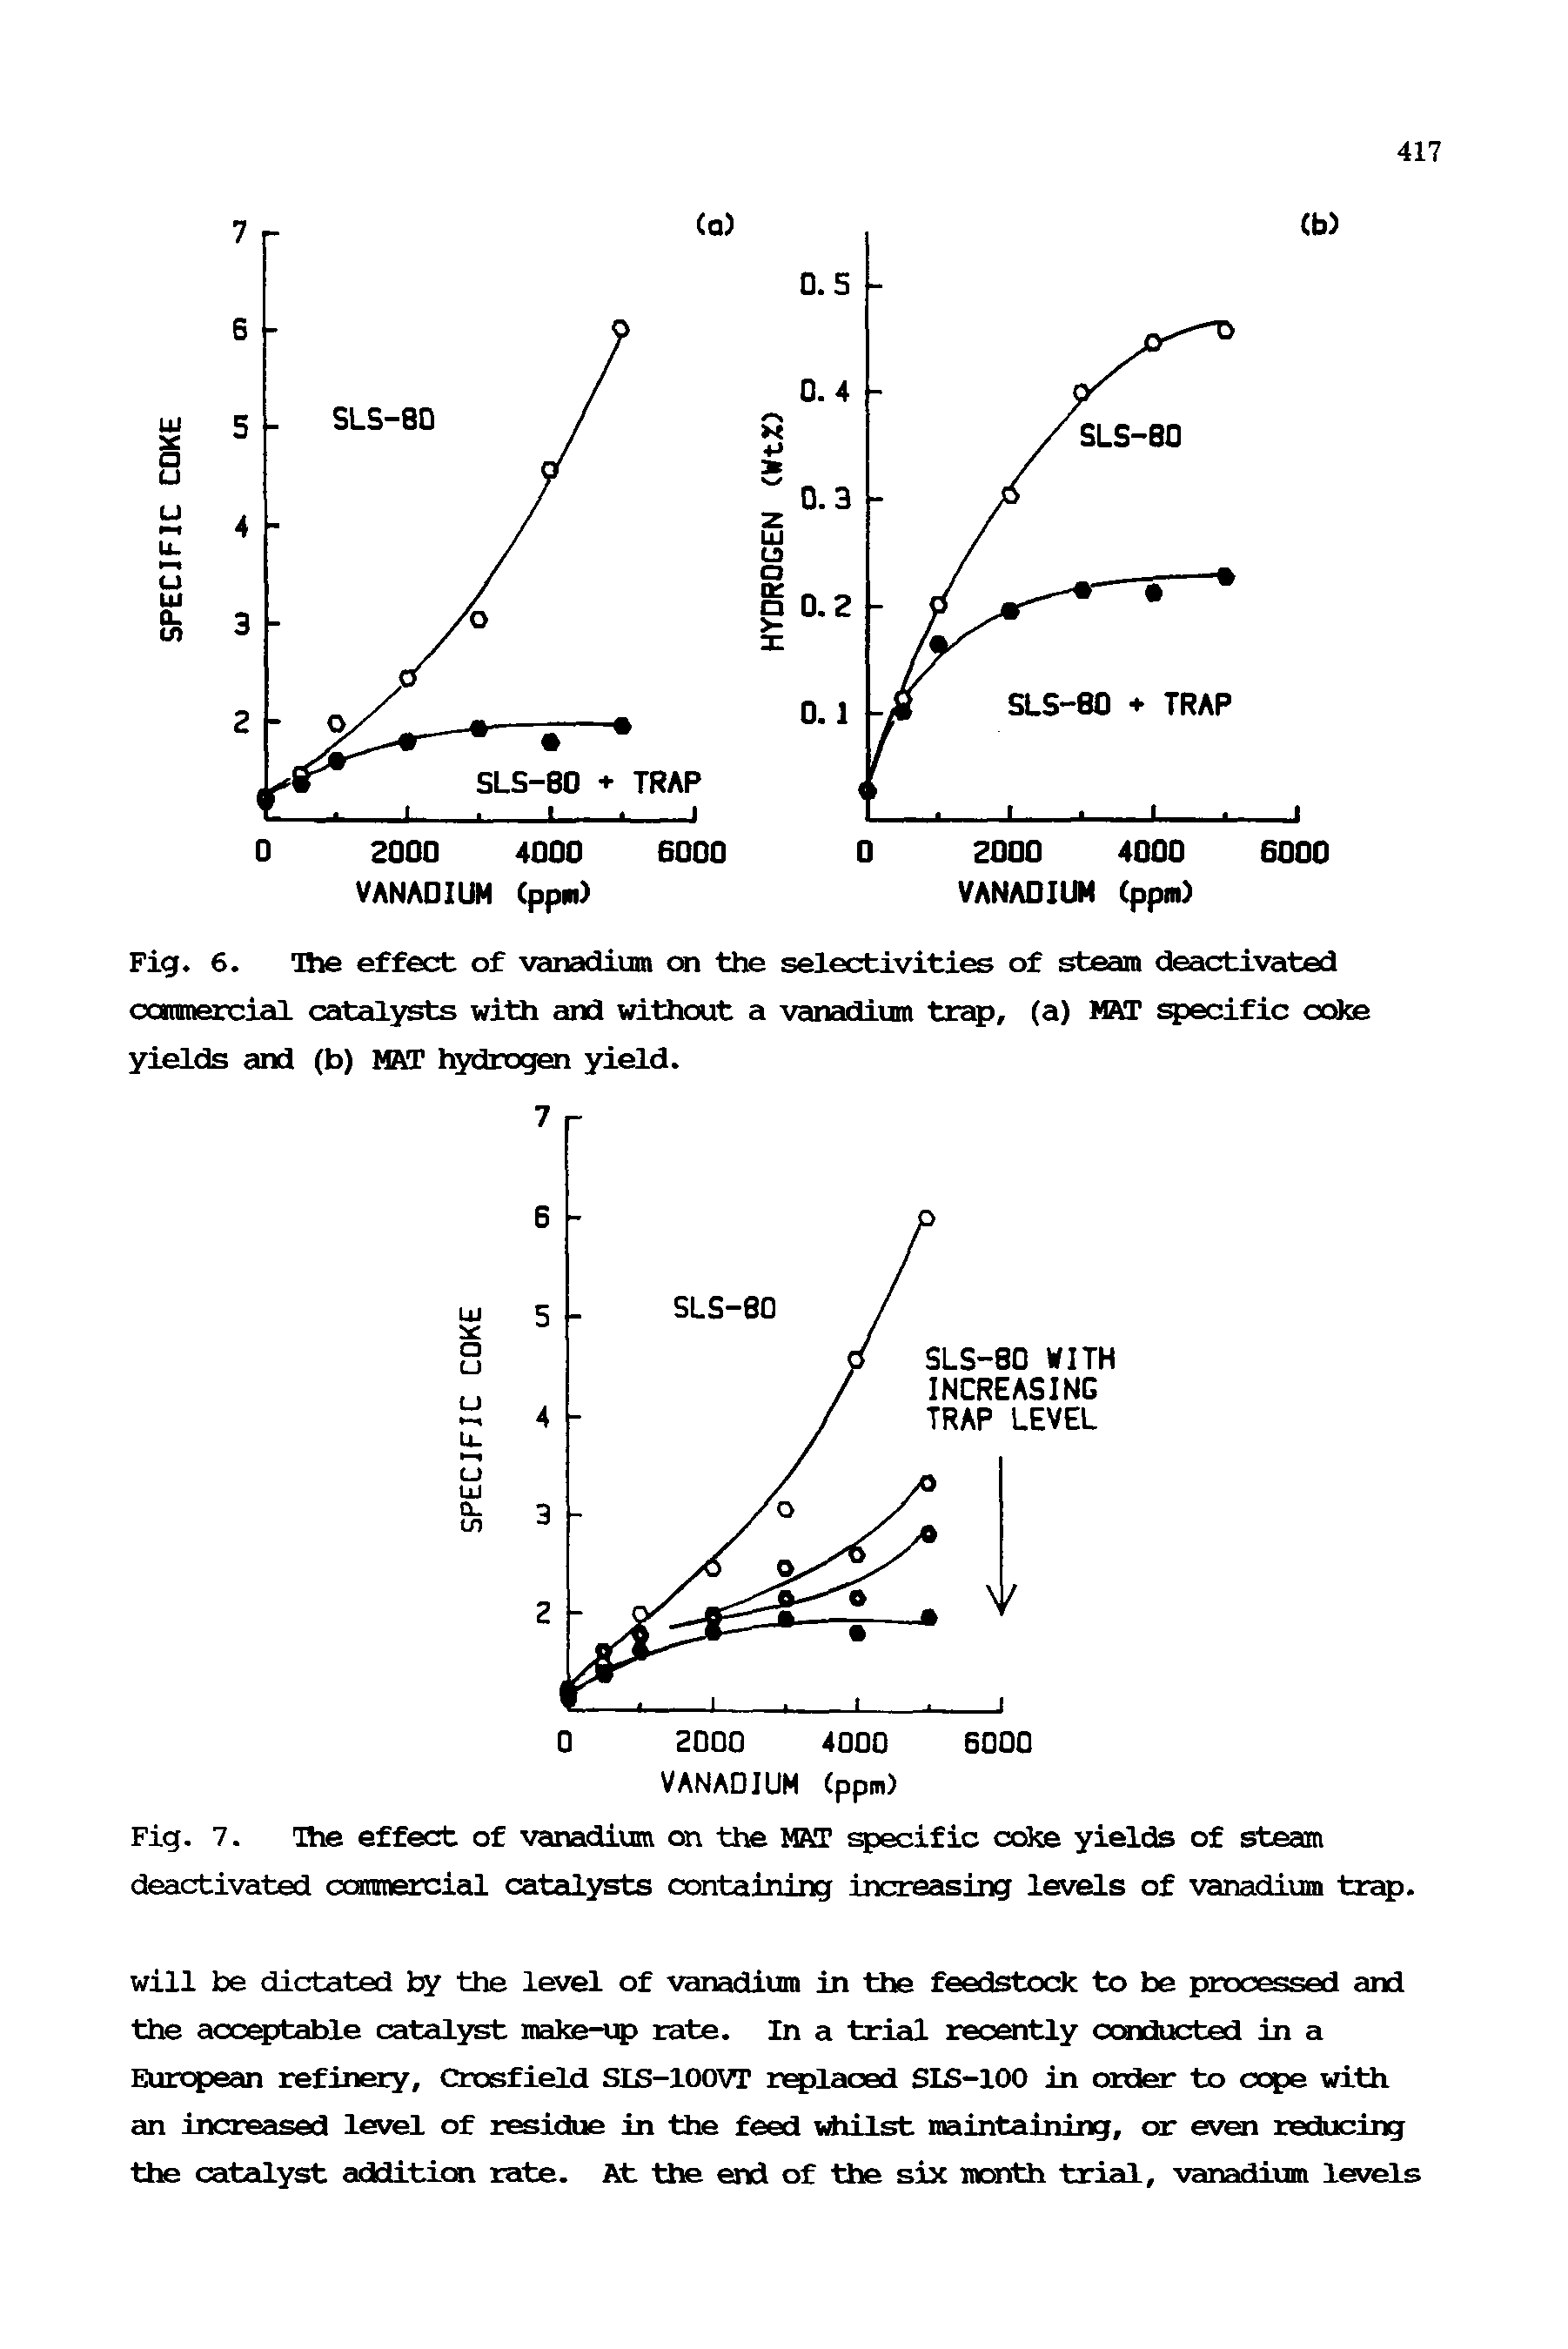 Fig. 6. Hie effect of vanaKiium on the selectivities of steam deactivated ocmneccial caitalysts witdi and without a vanadium trap, (a) MAT specific oolos yields and (b) MAT hydrogen yield.